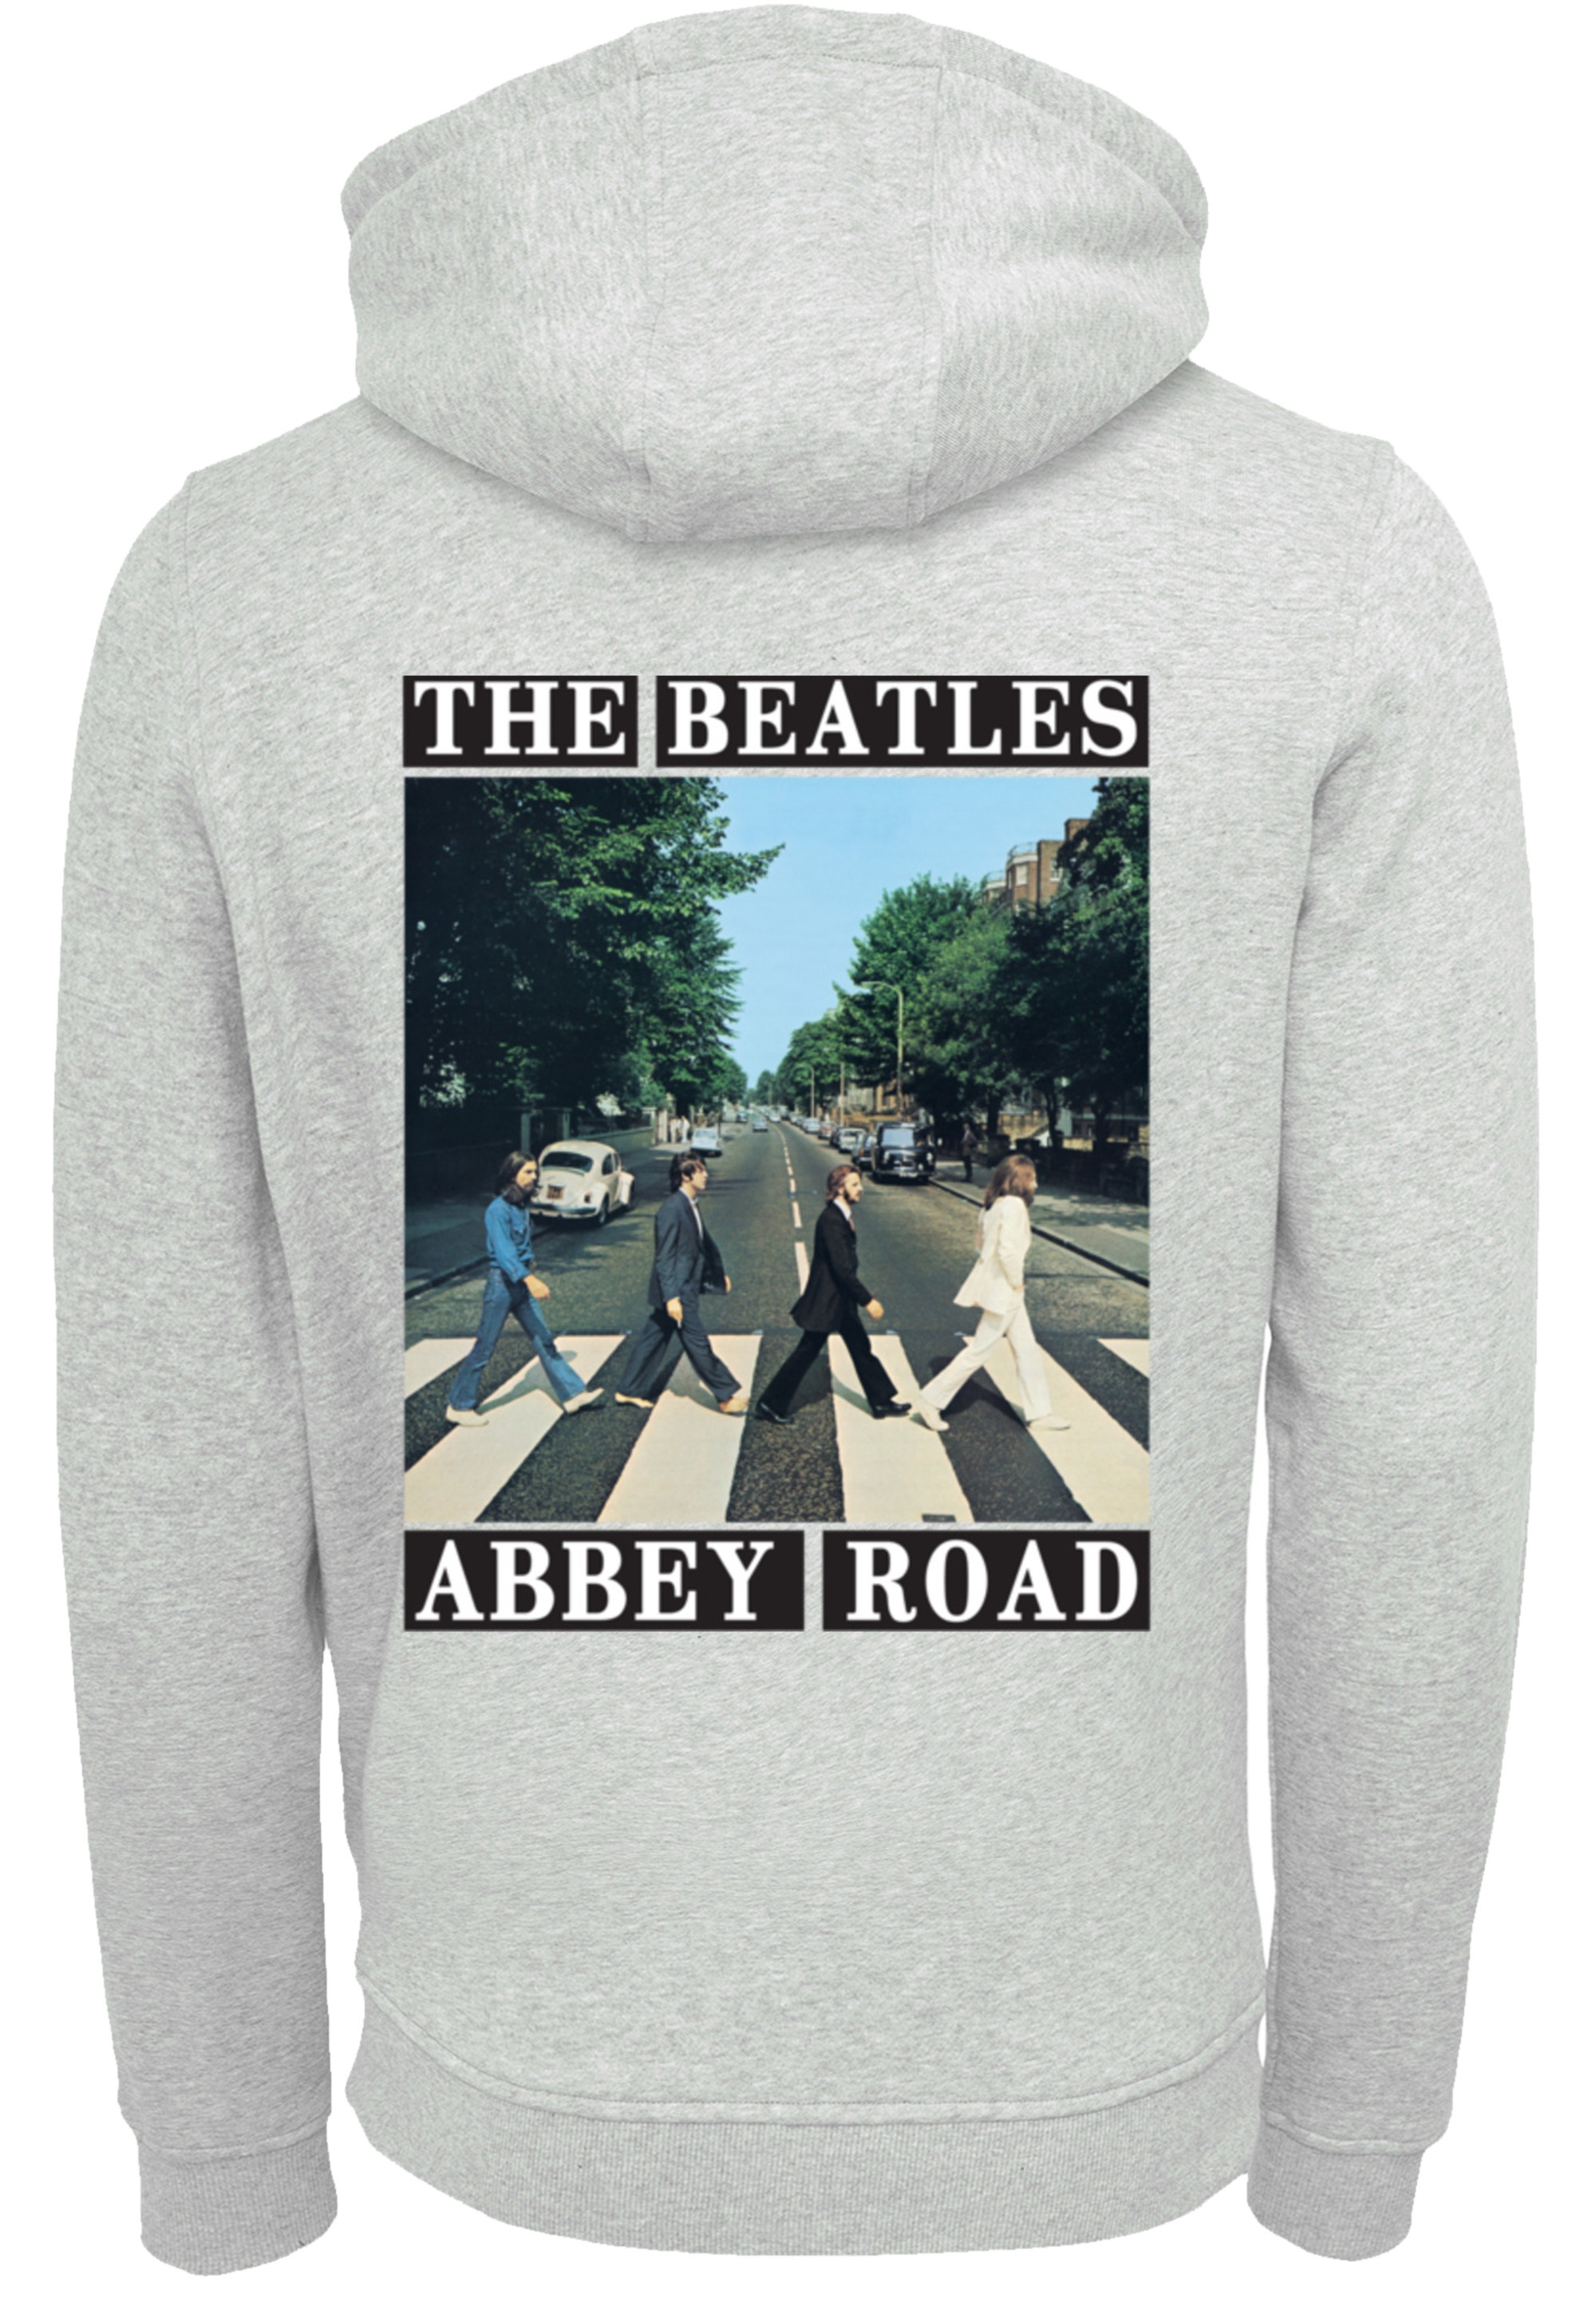 F4NT4STIC Kapuzenpullover »The Beatles Abbey Road Rock Musik Band«, Hoodie,  Warm, Bequem online kaufen | I'm walking